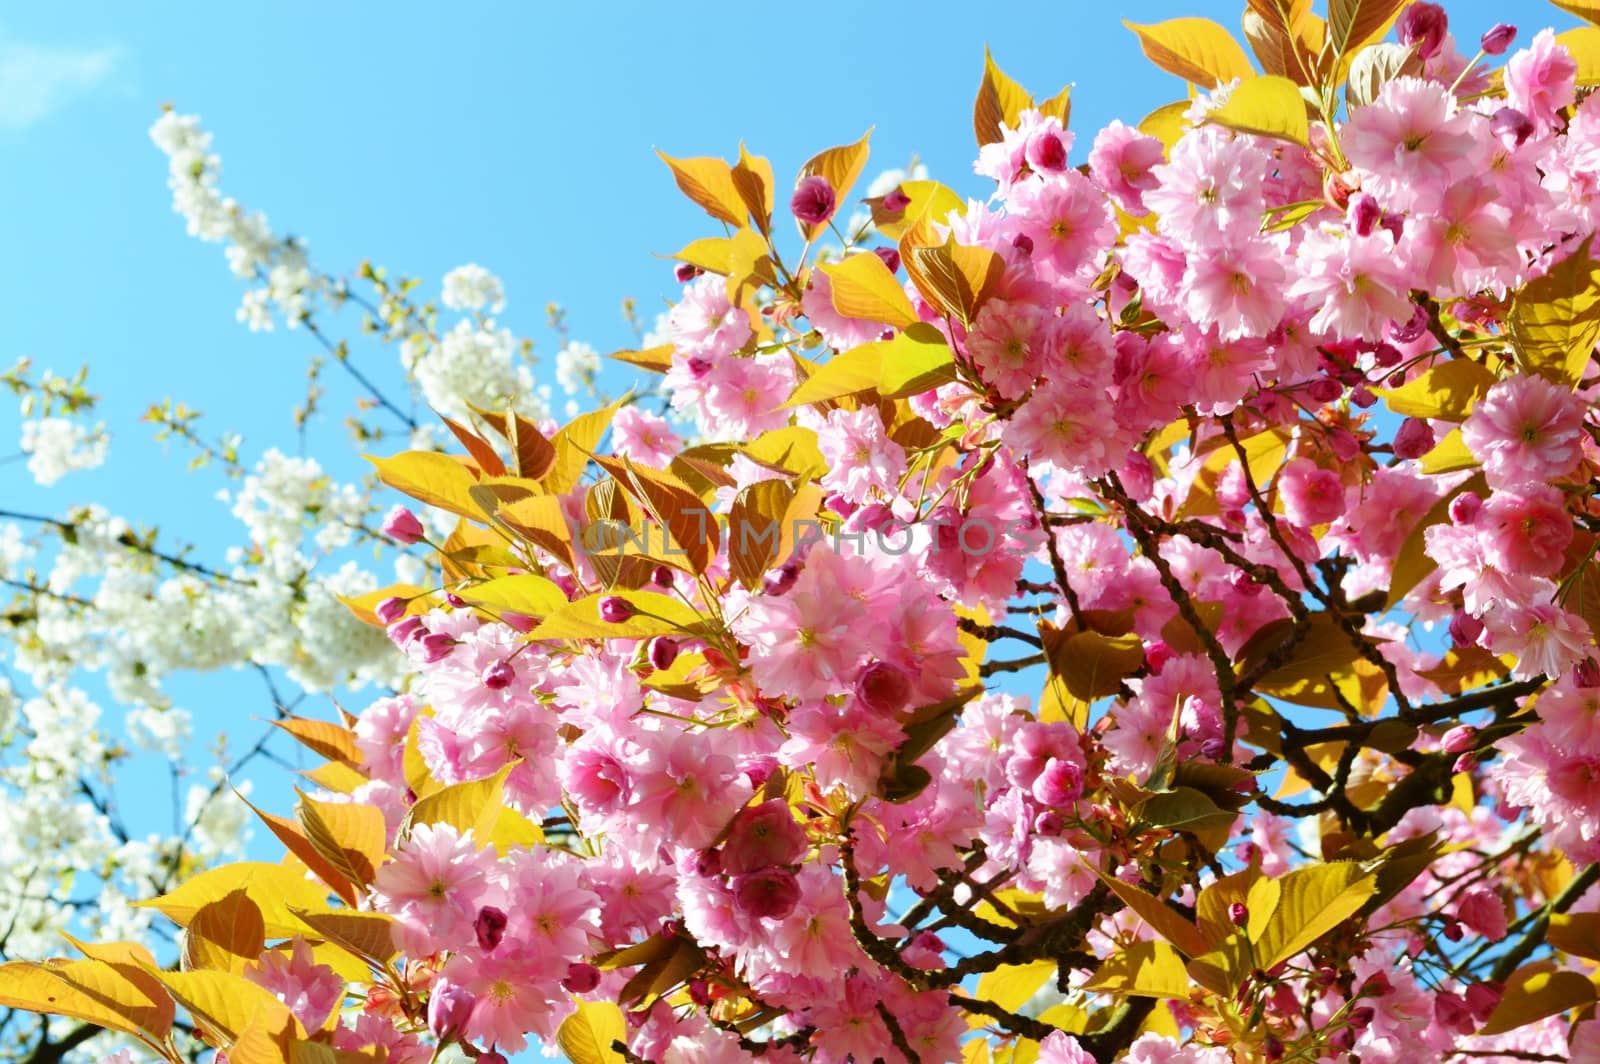 A close-up image of colourful Spring Blossom.